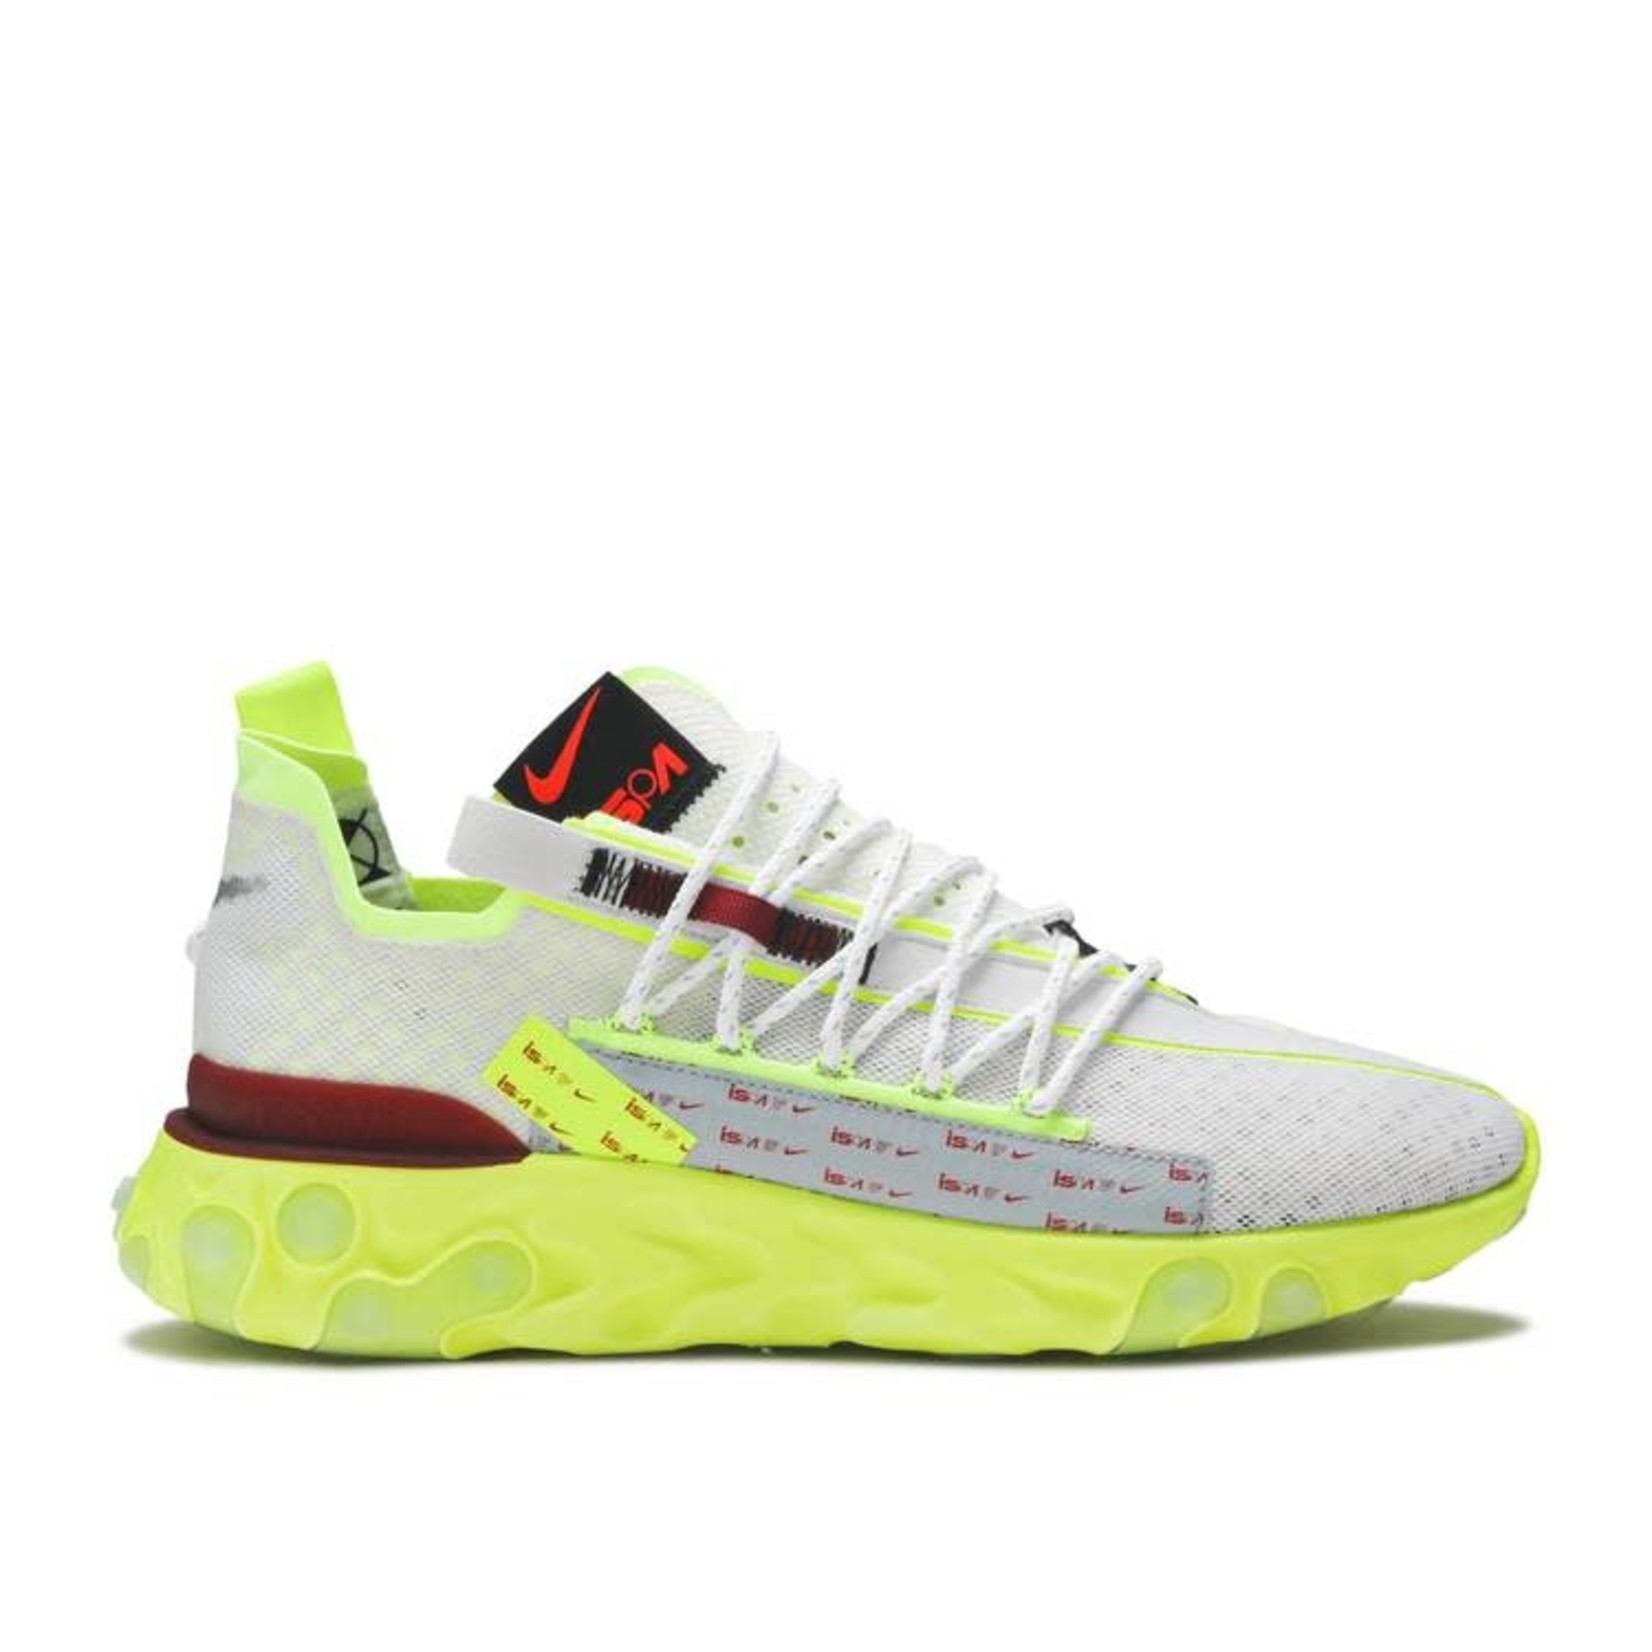 Nike Nike React Runner ISPA Platinum Tint Volt Glow Team Red Size 8, DS BRAND NEW